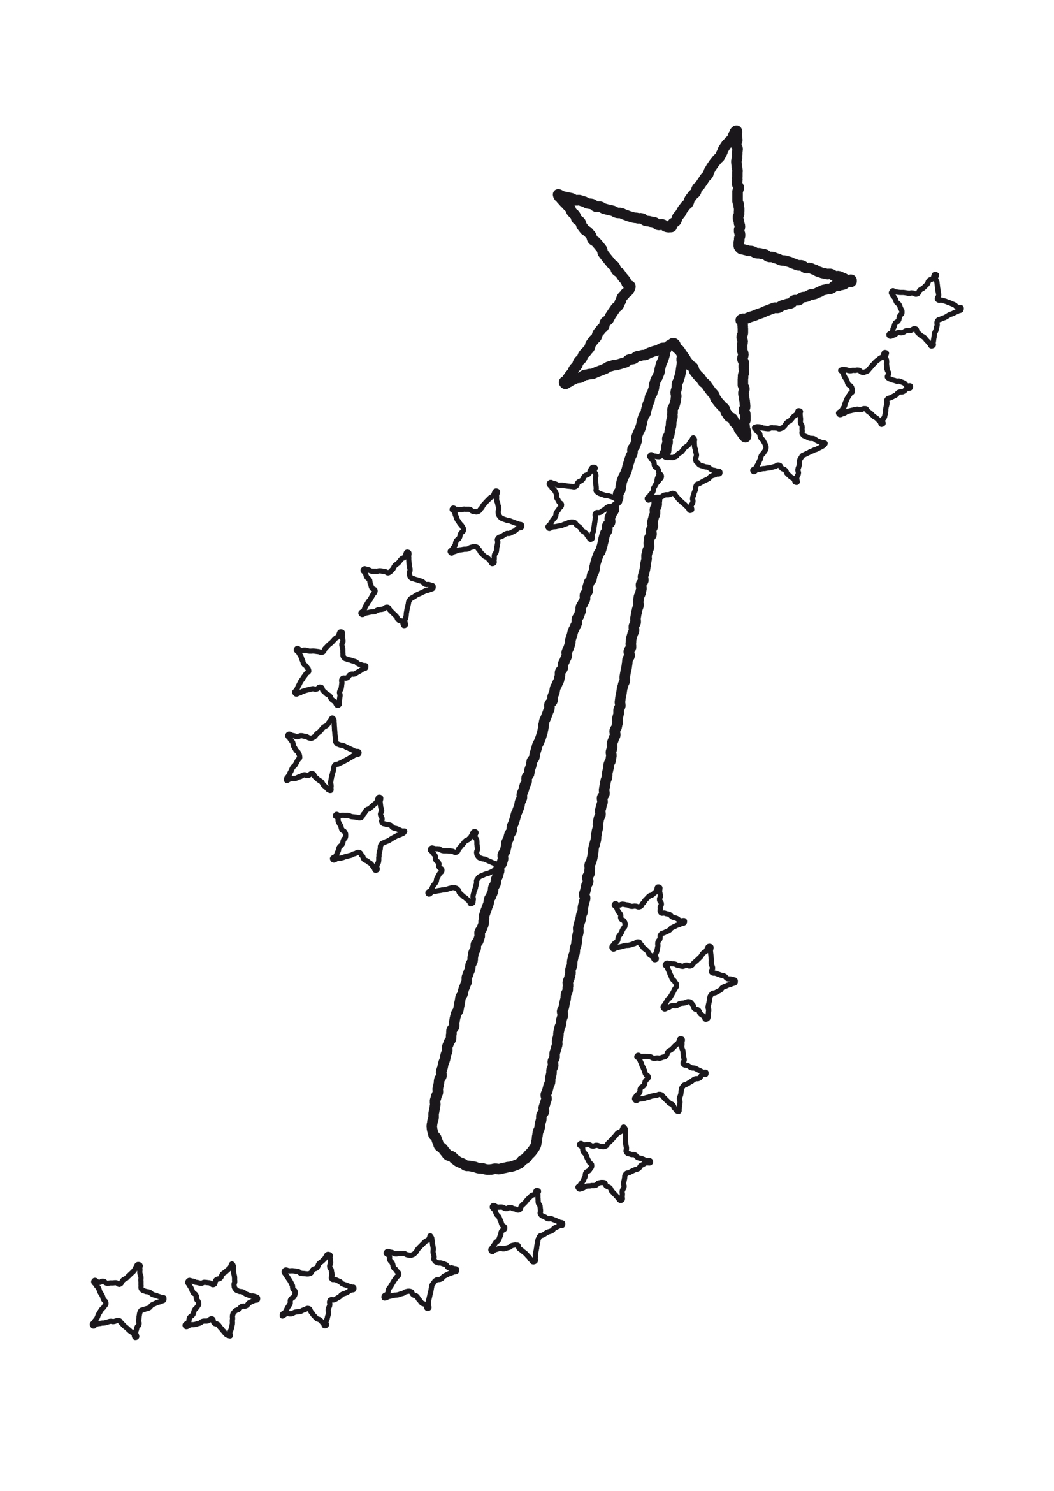 magic-wand-11-coloring-page-free-printable-coloring-pages-for-kids